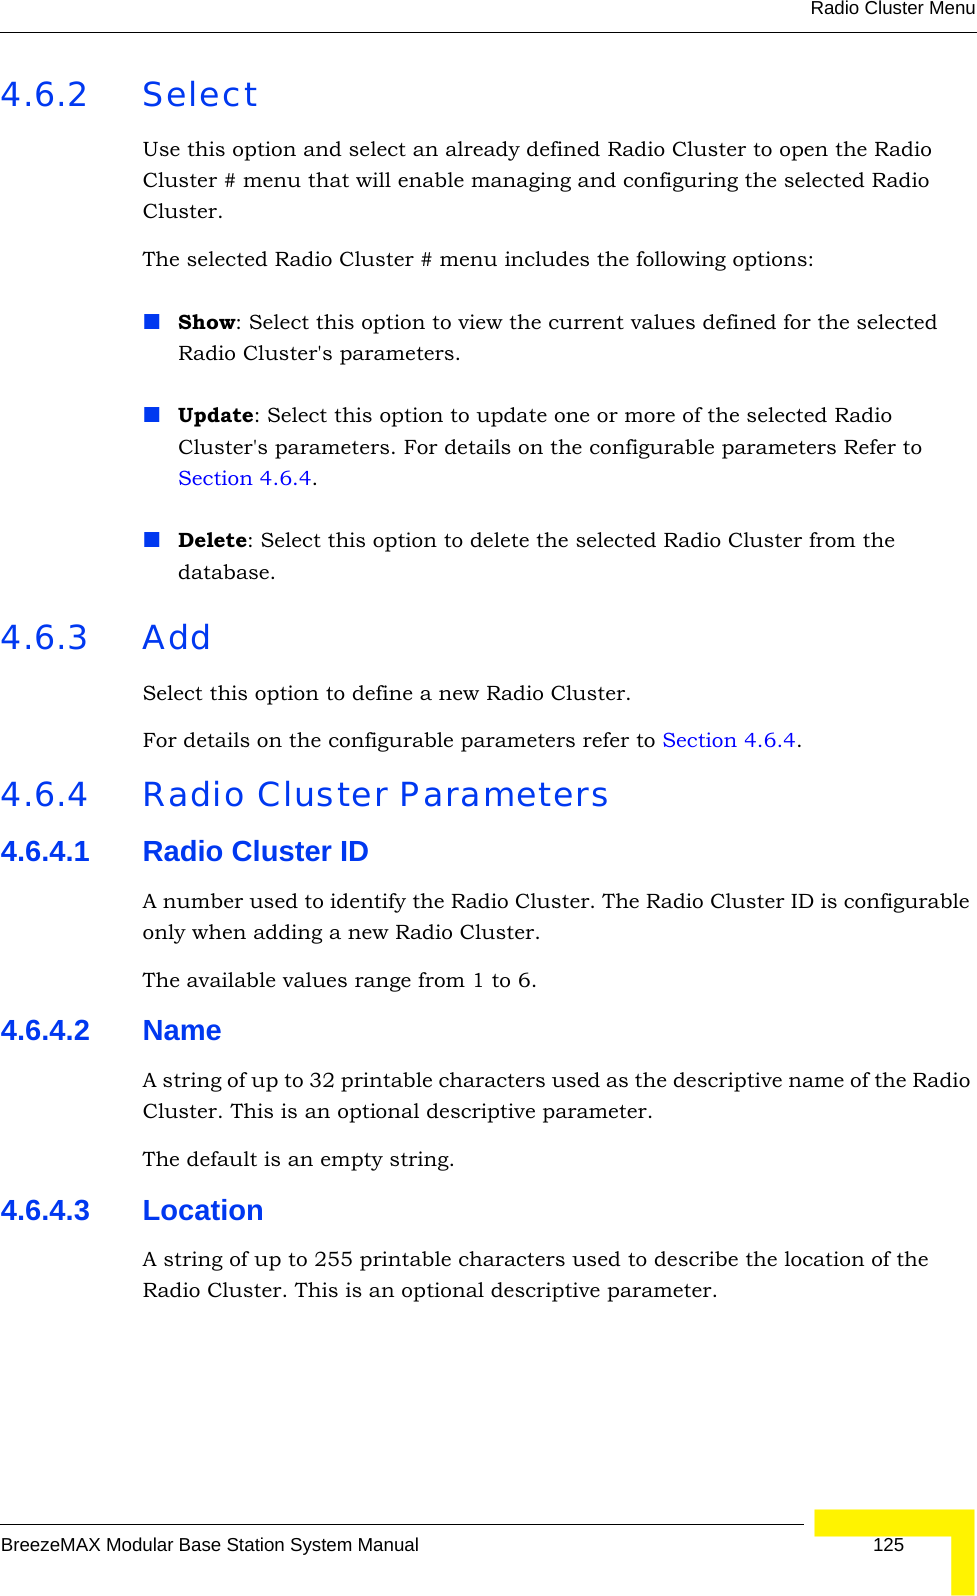 Radio Cluster MenuBreezeMAX Modular Base Station System Manual 1254.6.2 SelectUse this option and select an already defined Radio Cluster to open the Radio Cluster # menu that will enable managing and configuring the selected Radio Cluster.The selected Radio Cluster # menu includes the following options:Show: Select this option to view the current values defined for the selected Radio Cluster&apos;s parameters.Update: Select this option to update one or more of the selected Radio Cluster&apos;s parameters. For details on the configurable parameters Refer to Section 4.6.4. Delete: Select this option to delete the selected Radio Cluster from the database.4.6.3 AddSelect this option to define a new Radio Cluster.For details on the configurable parameters refer to Section 4.6.4.4.6.4 Radio Cluster Parameters4.6.4.1 Radio Cluster IDA number used to identify the Radio Cluster. The Radio Cluster ID is configurable only when adding a new Radio Cluster.The available values range from 1 to 6.4.6.4.2 NameA string of up to 32 printable characters used as the descriptive name of the Radio Cluster. This is an optional descriptive parameter.The default is an empty string.4.6.4.3 LocationA string of up to 255 printable characters used to describe the location of the Radio Cluster. This is an optional descriptive parameter.